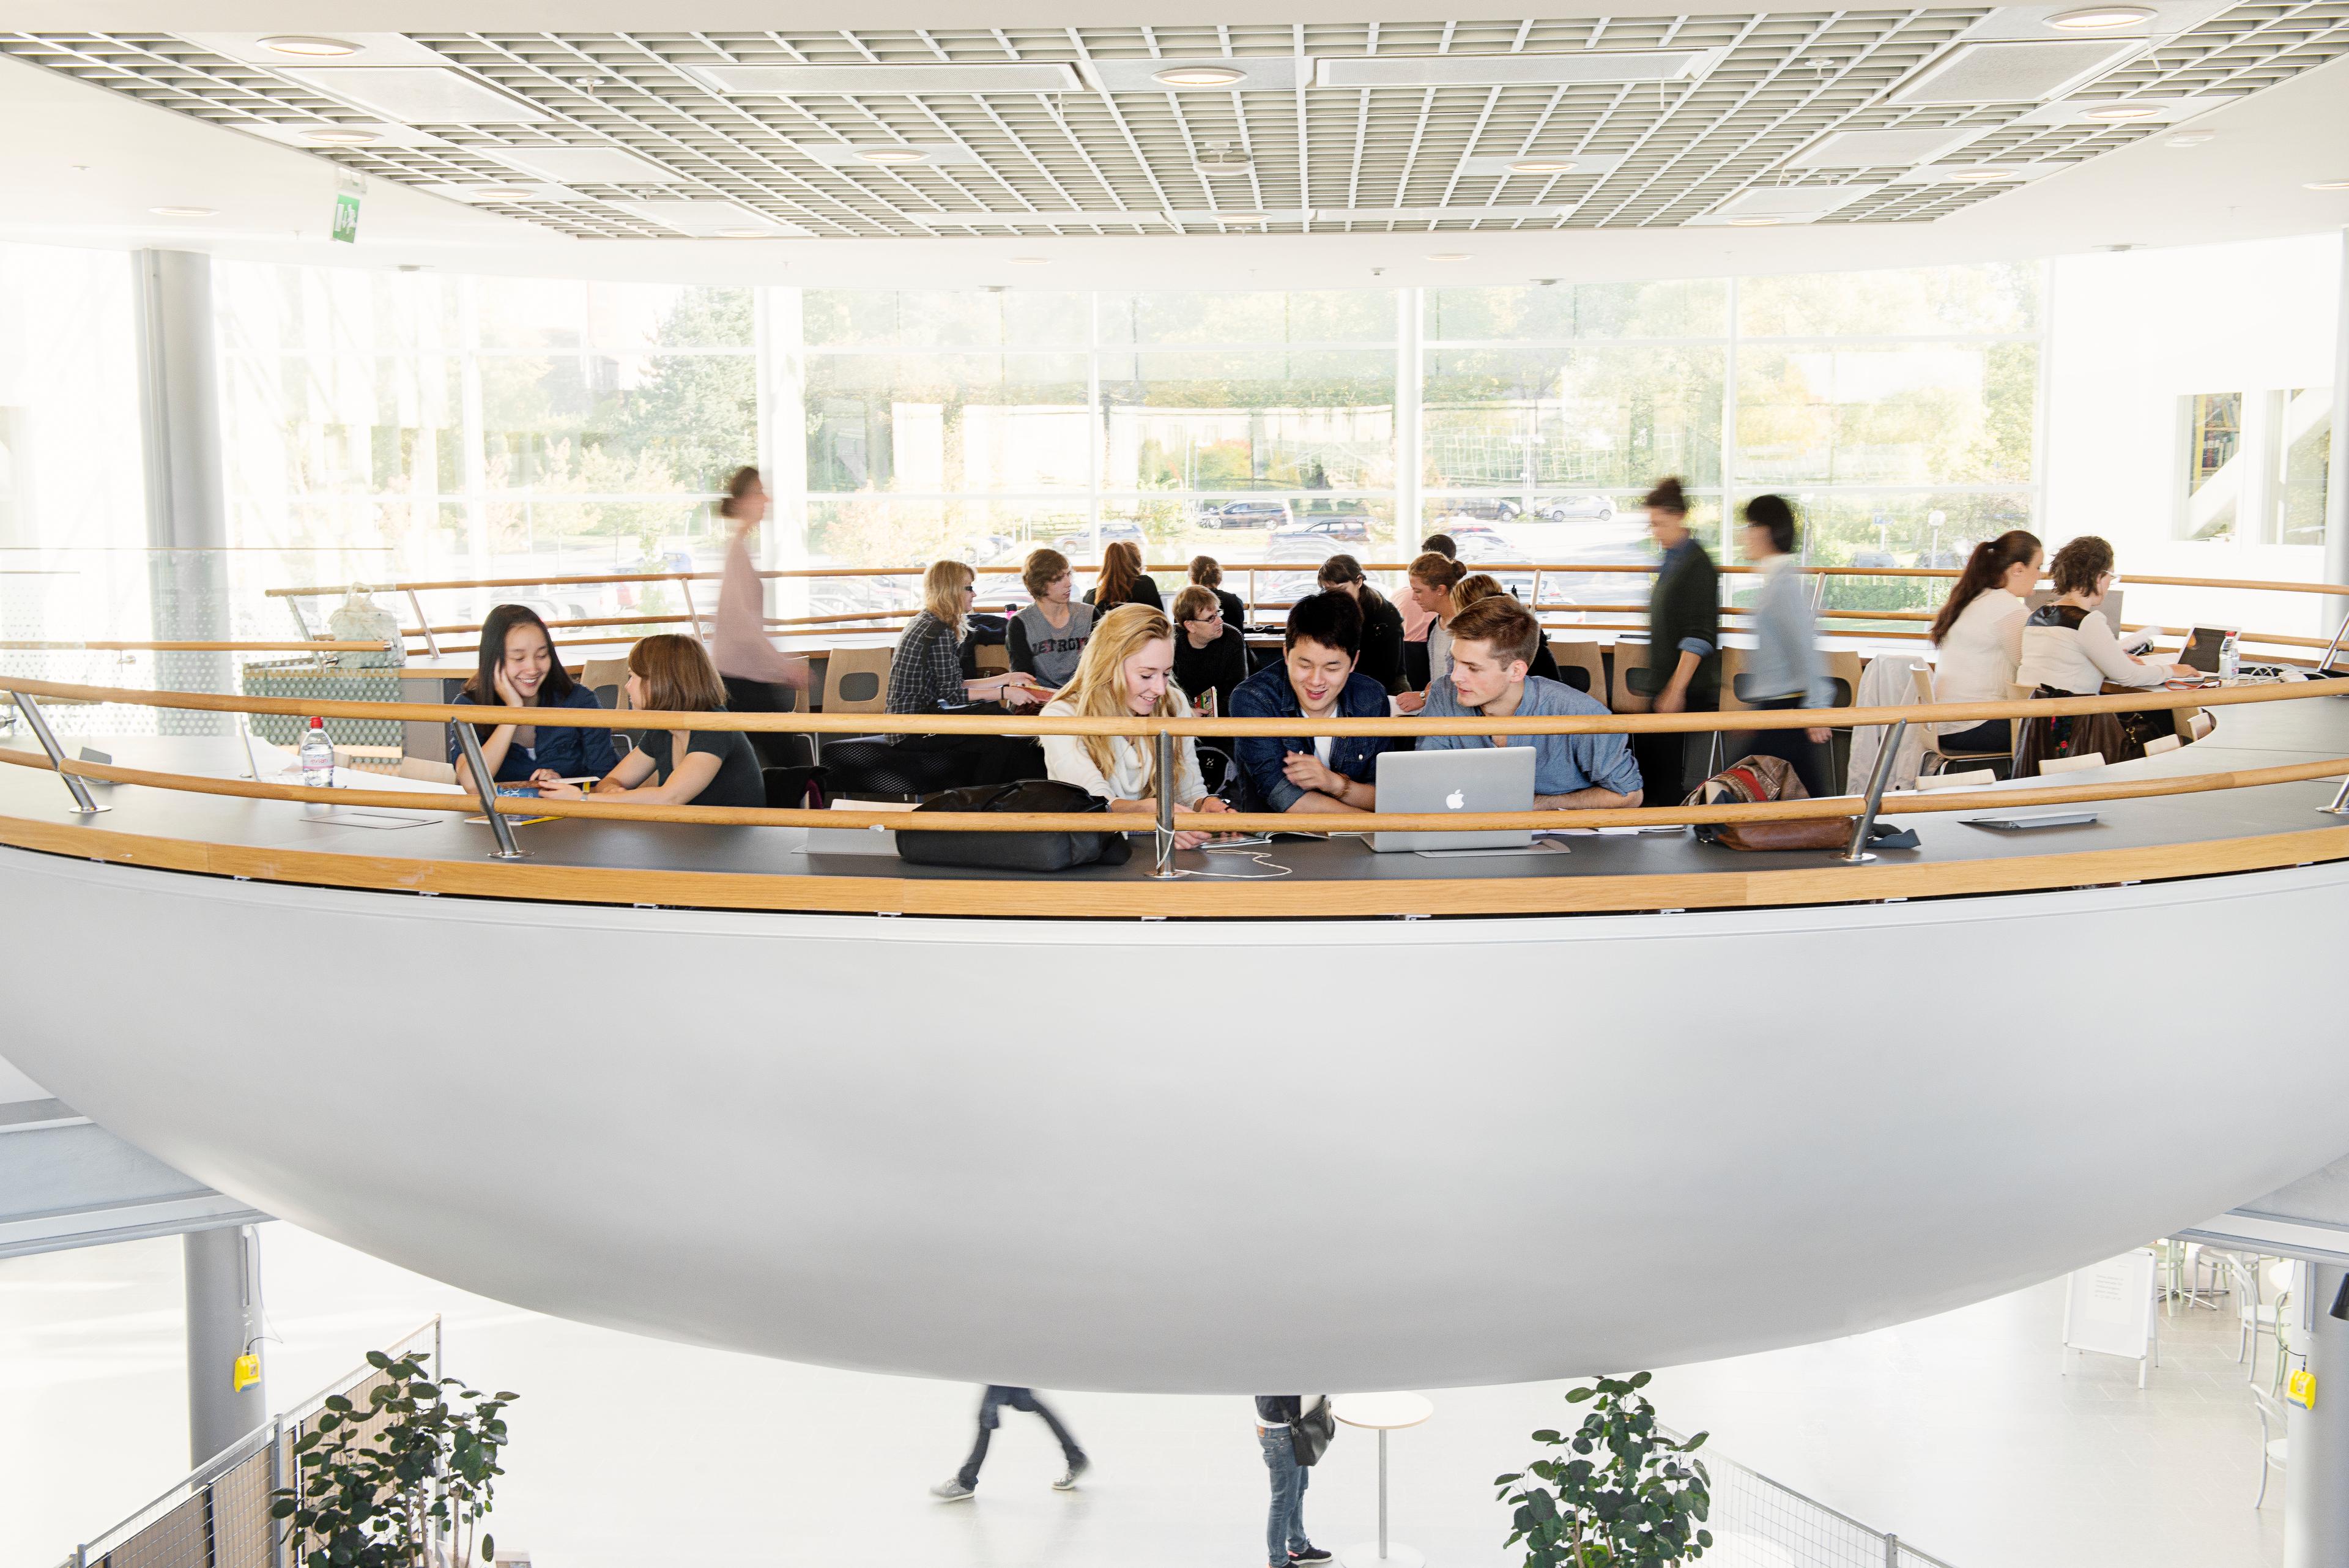 A number of students sitting in a white, bowl-shaped space that looks like it's suspended in mid-air.